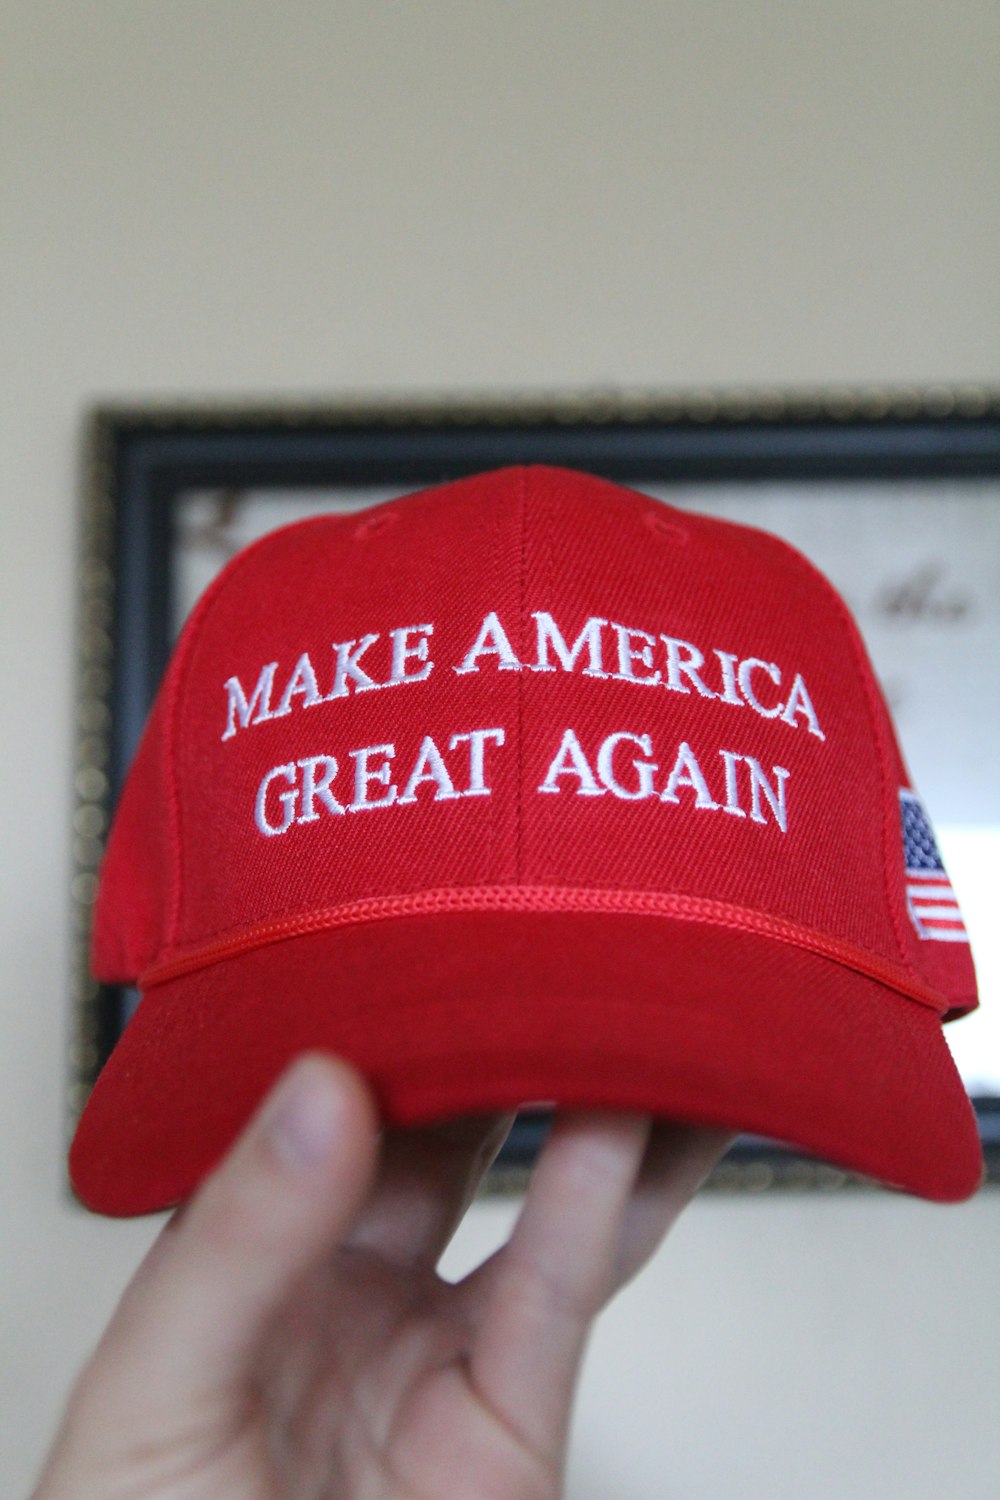 a red hat that says make america great again